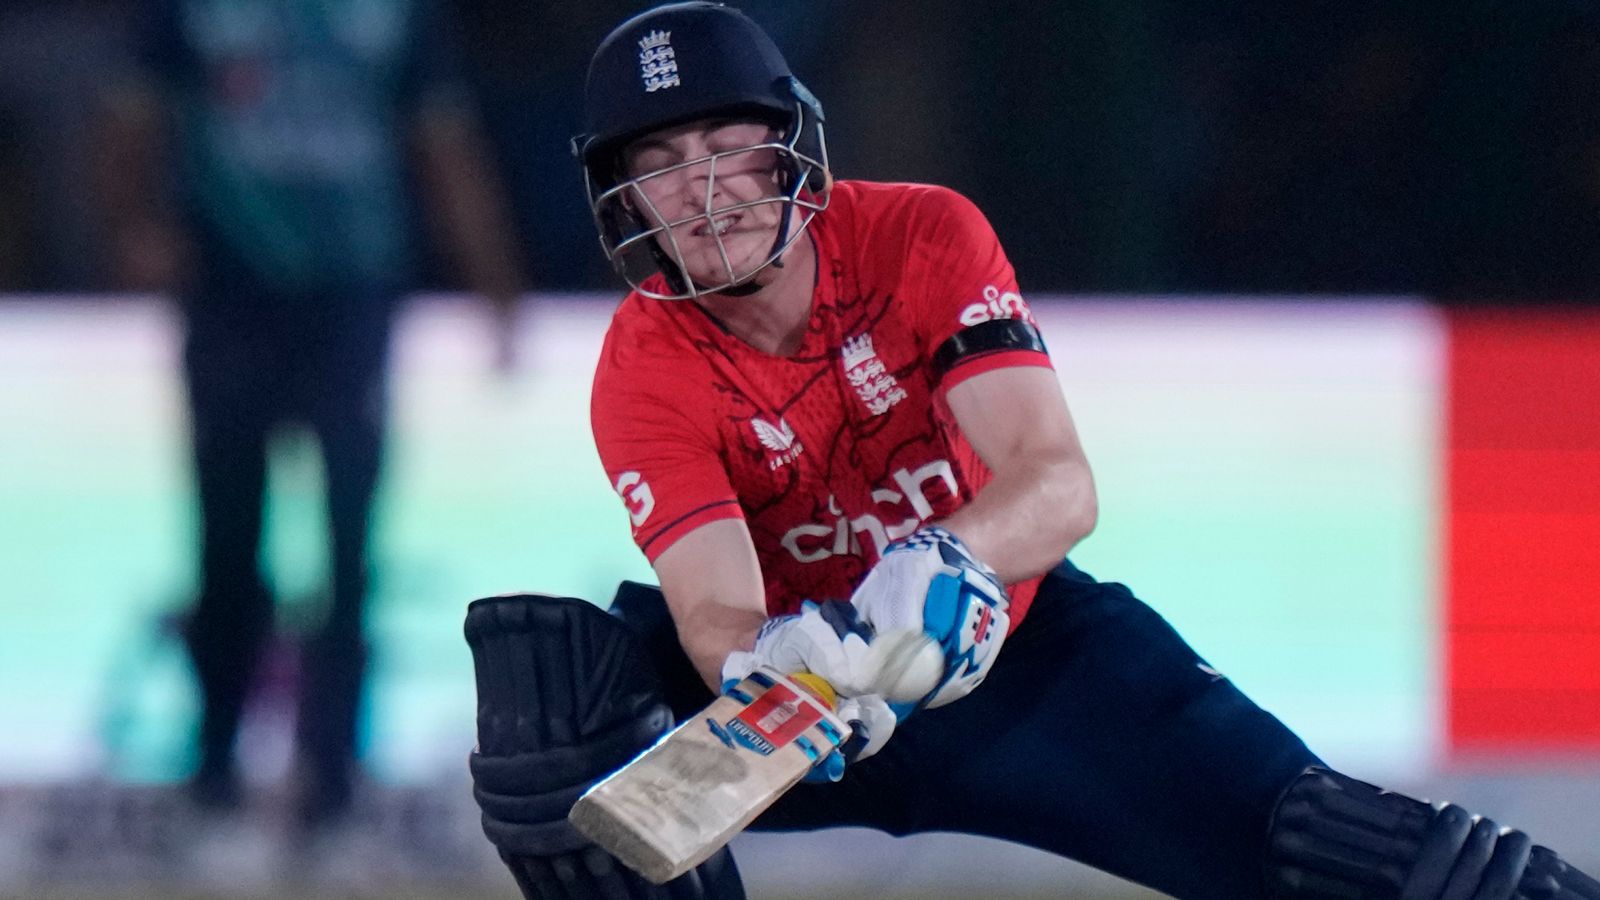 England beat Pakistan in the T20I series opener in Karachi with Alex Hales and Harry Brook starring